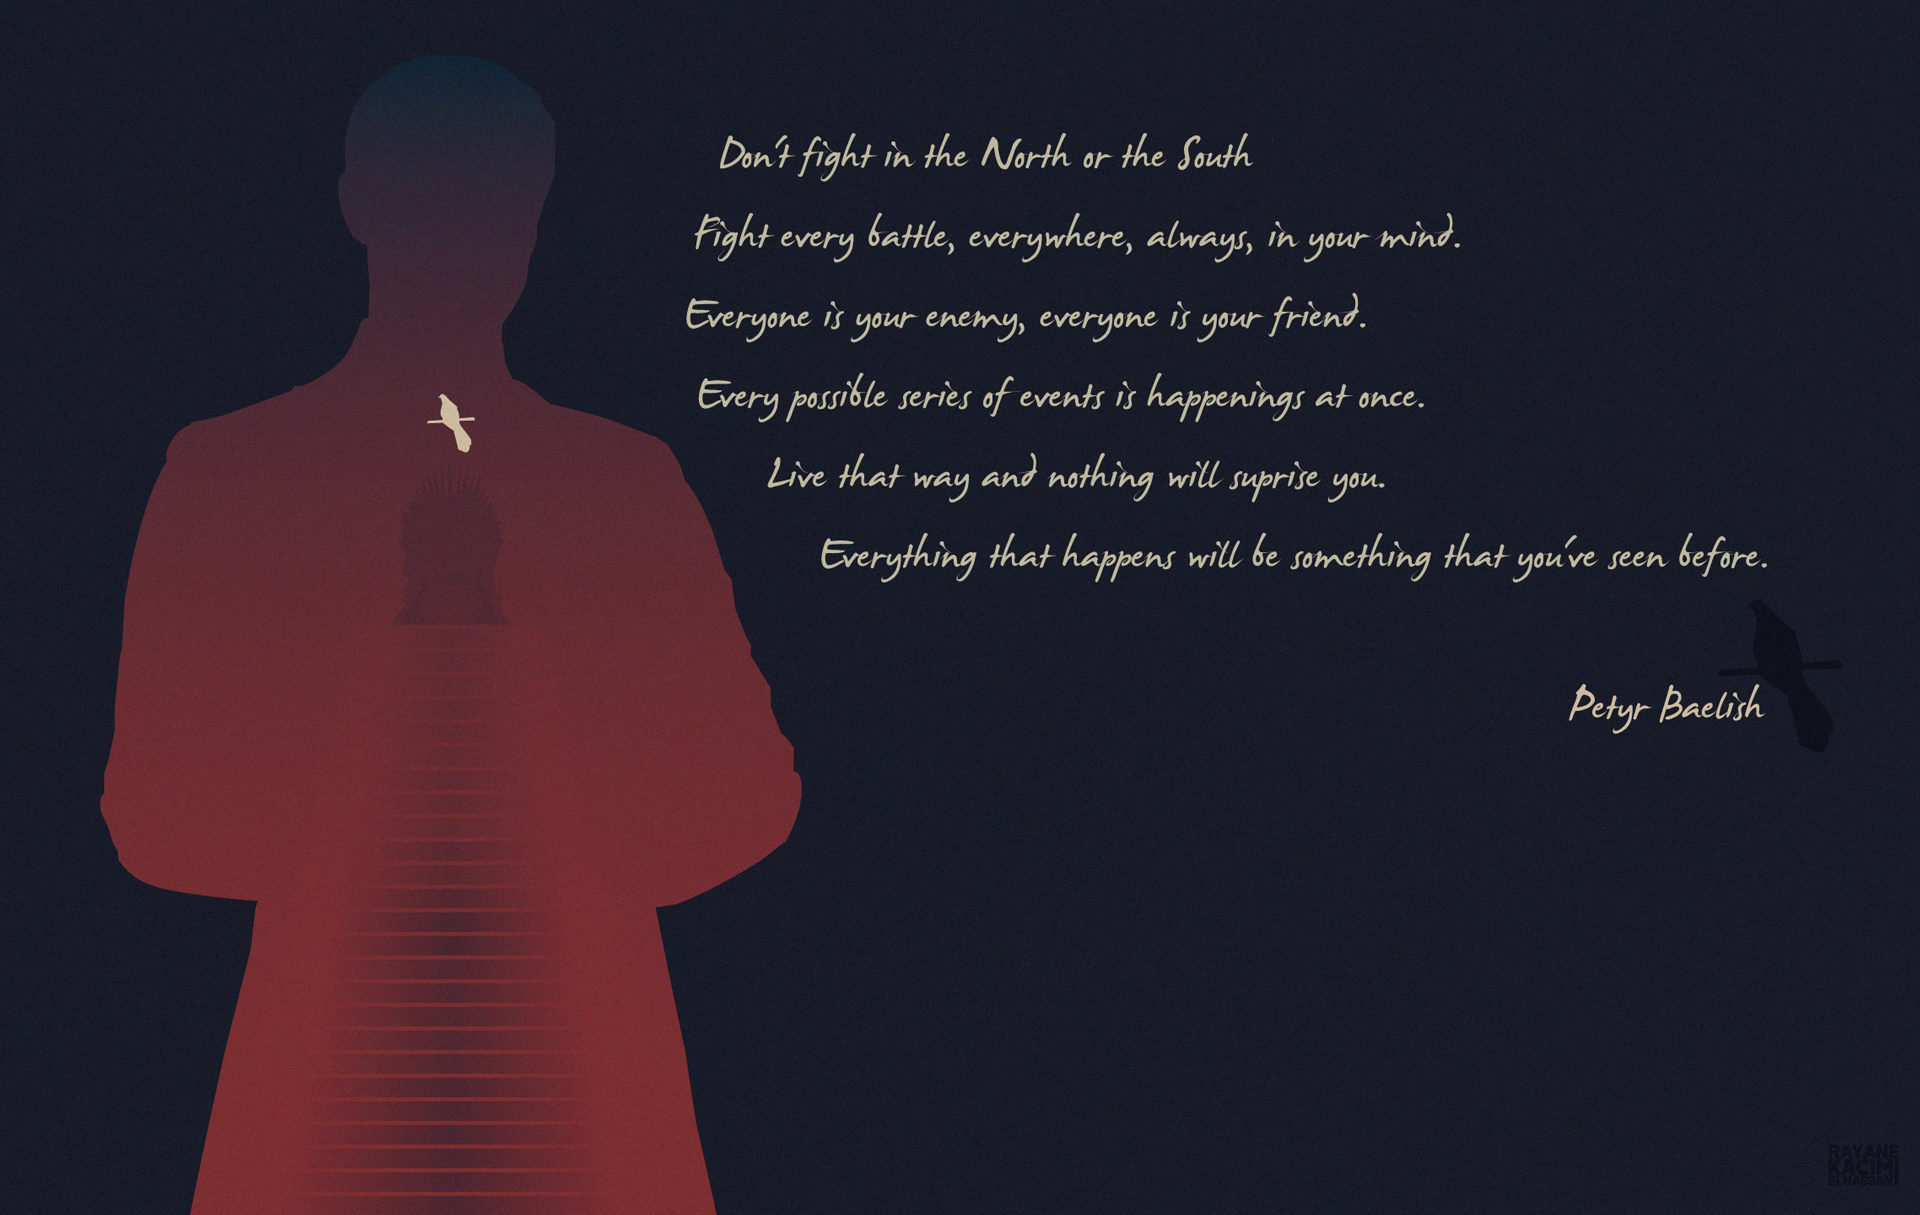 S7E3 Petyr Baelish Gave Me Chills With This Quote So I Made A